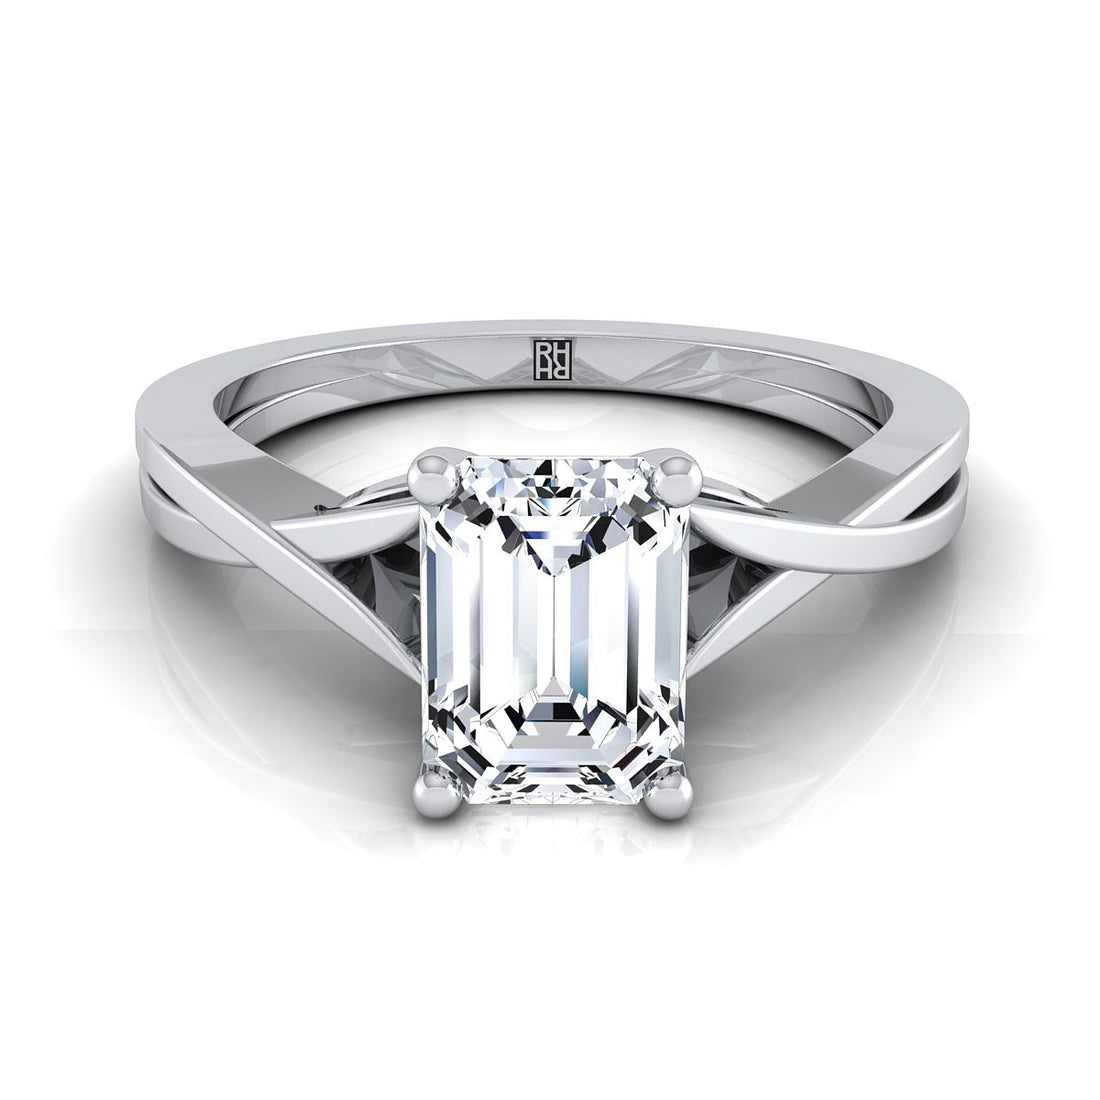 What Makes Emerald Diamond Settings Affordable to Round-Cut Diamonds?